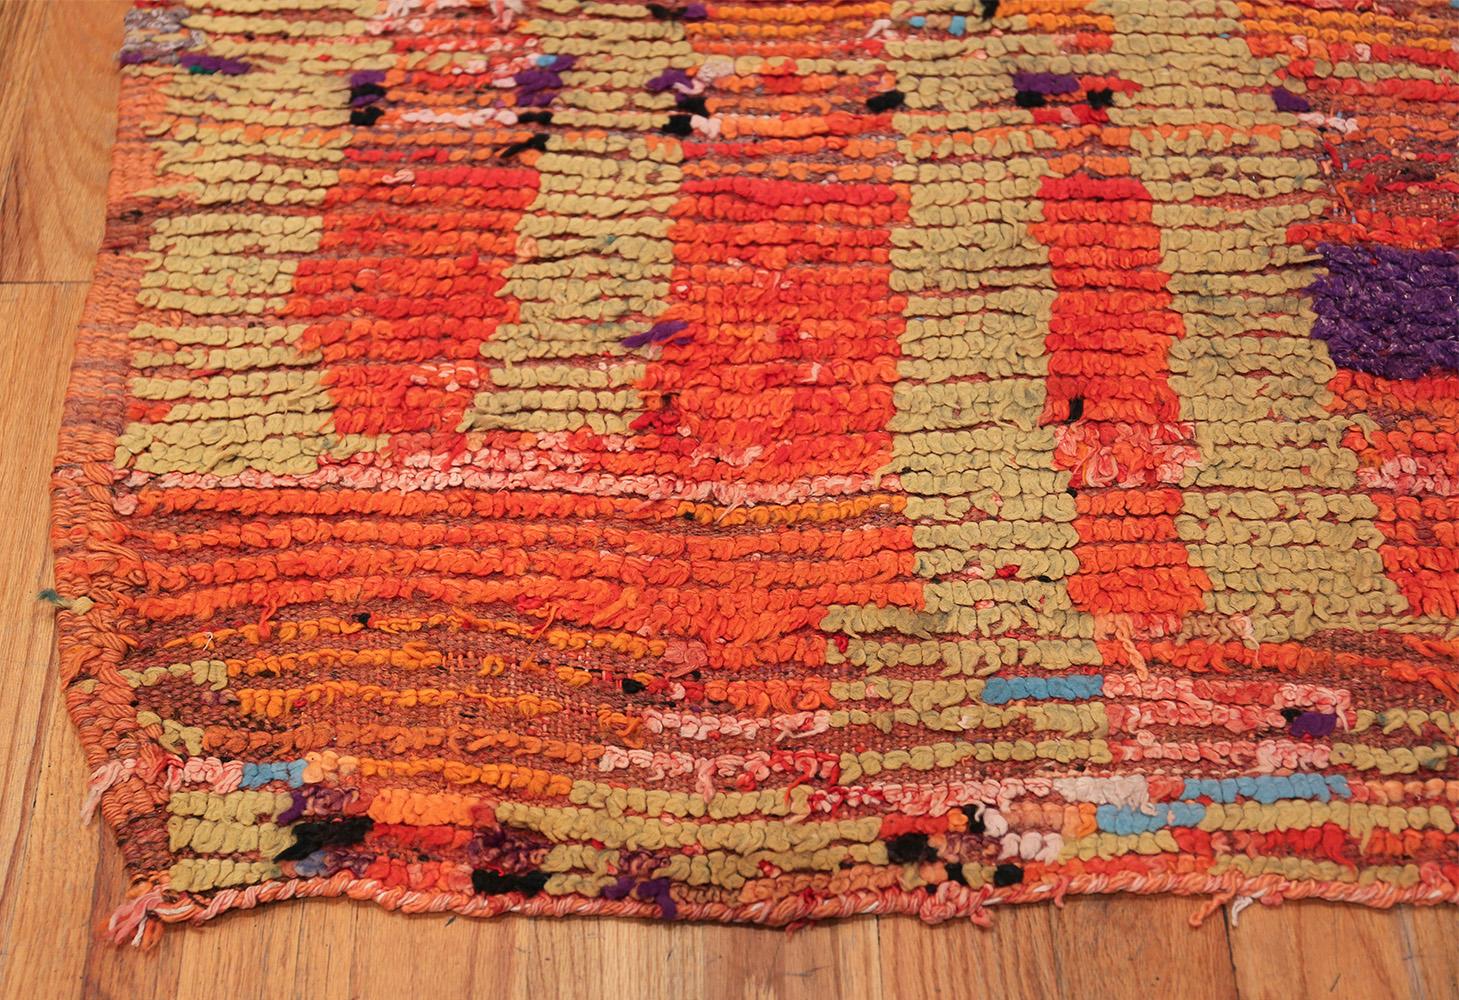 20th Century Colorful Vintage Moroccan Rug. Size: 5 ft 2 in x 10 ft (1.57 m x 3.05 m)